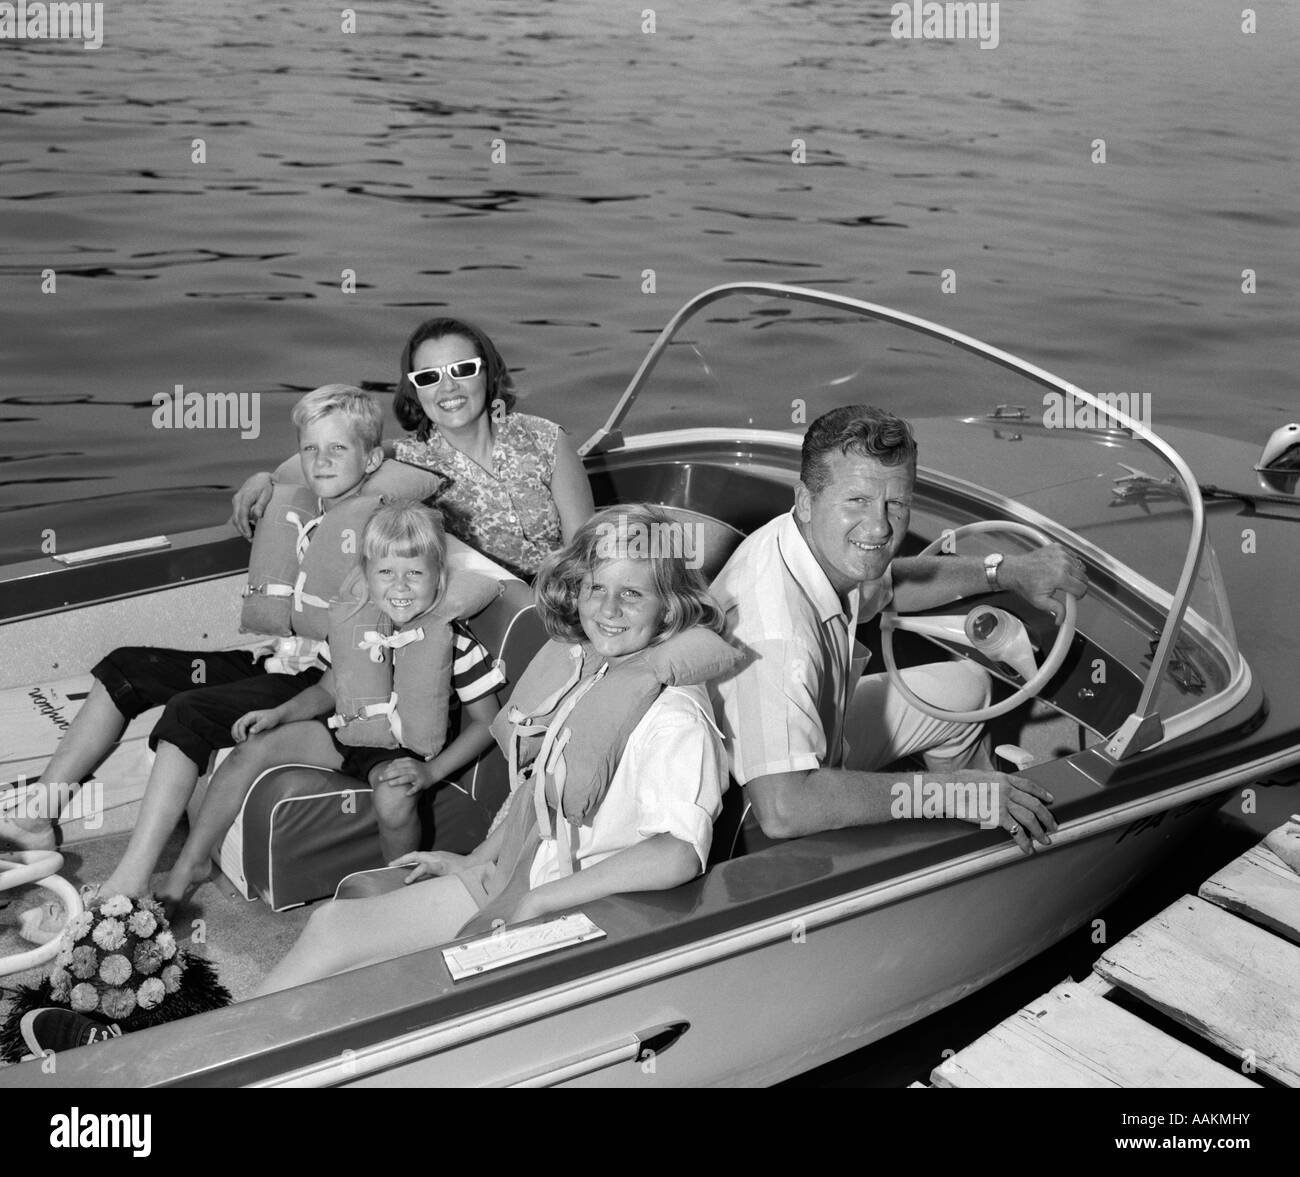 1960s SMILING FAMILY OF FIVE IN DOCKED BOAT CHILDREN WEARING LIFE VESTS LOOKING AT CAMERA Stock Photo